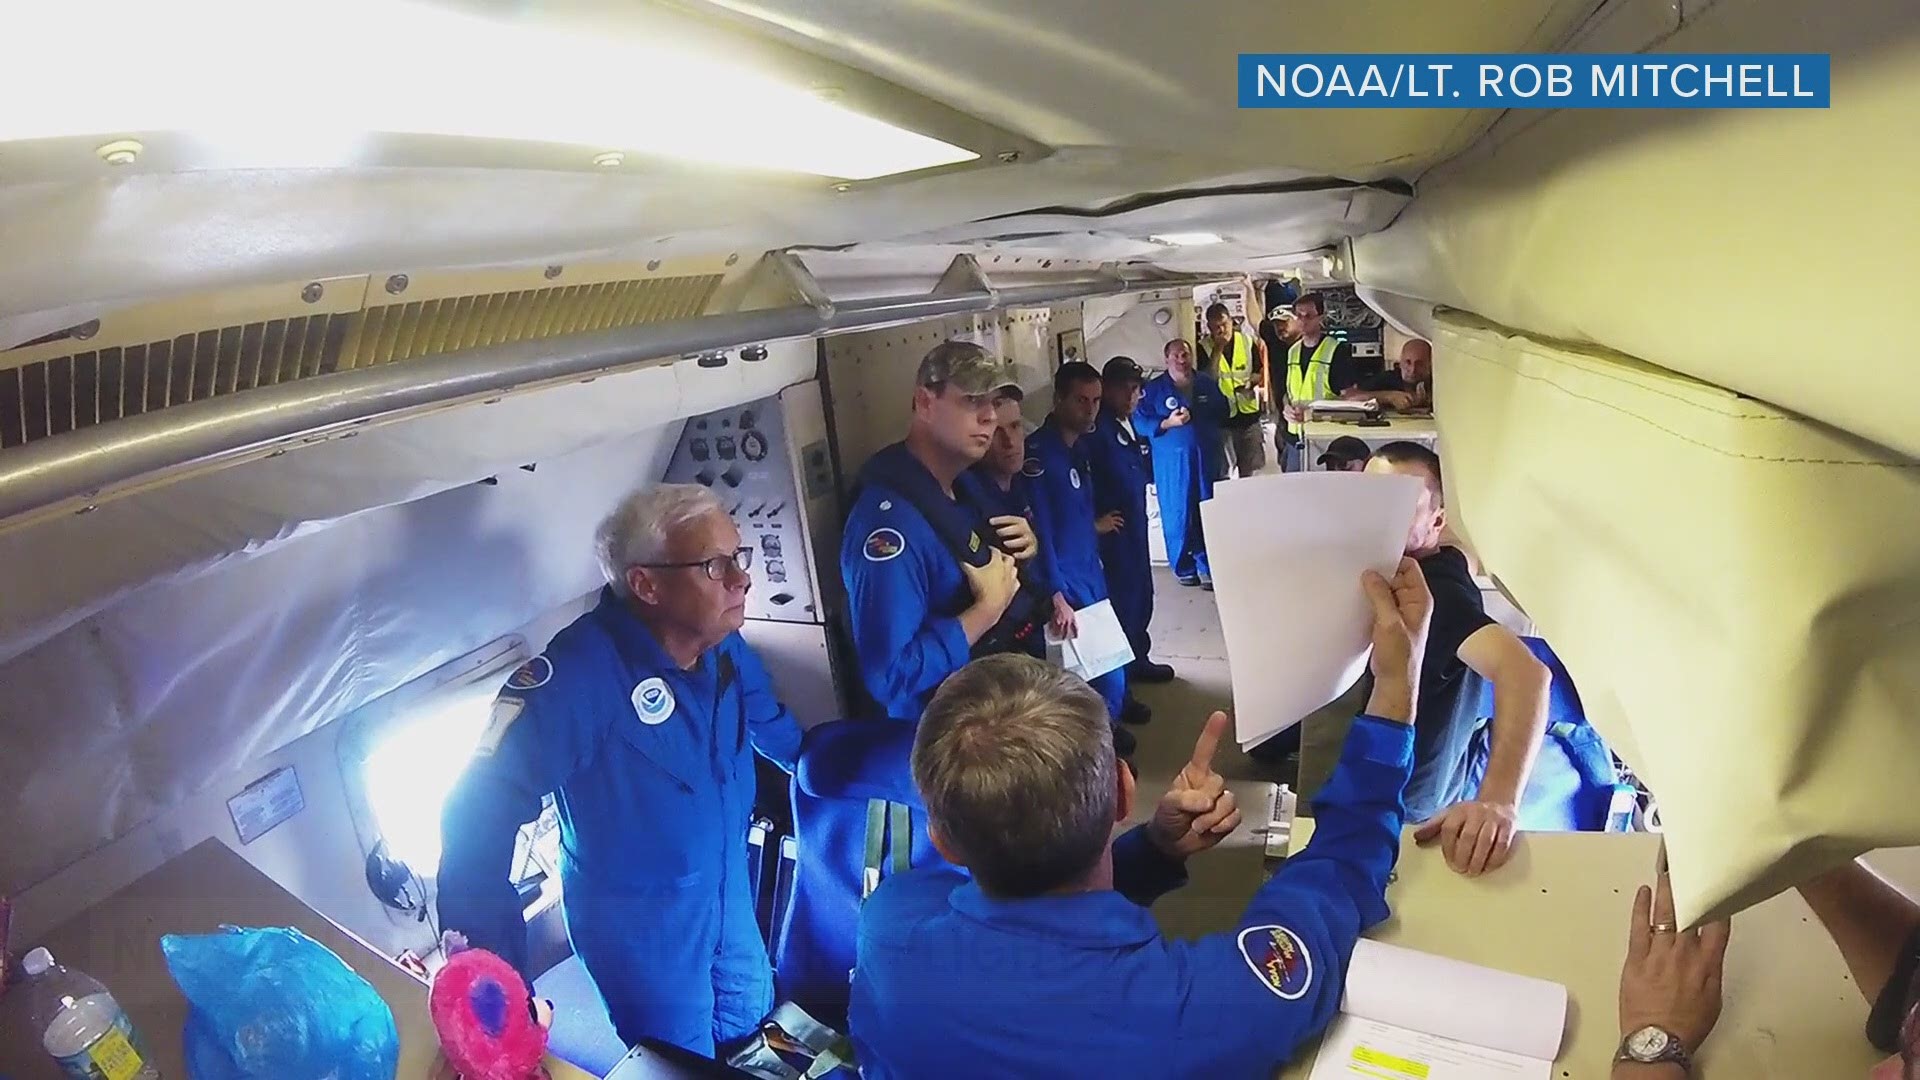 Hop aboard a NOAA Hurricane Hunters aircraft and fly into the eye of Hurricane Irma. As many across the U.S. and Florida prepared for its landfall, a team of scientists went into the storm in an attempt to build a better forecast.